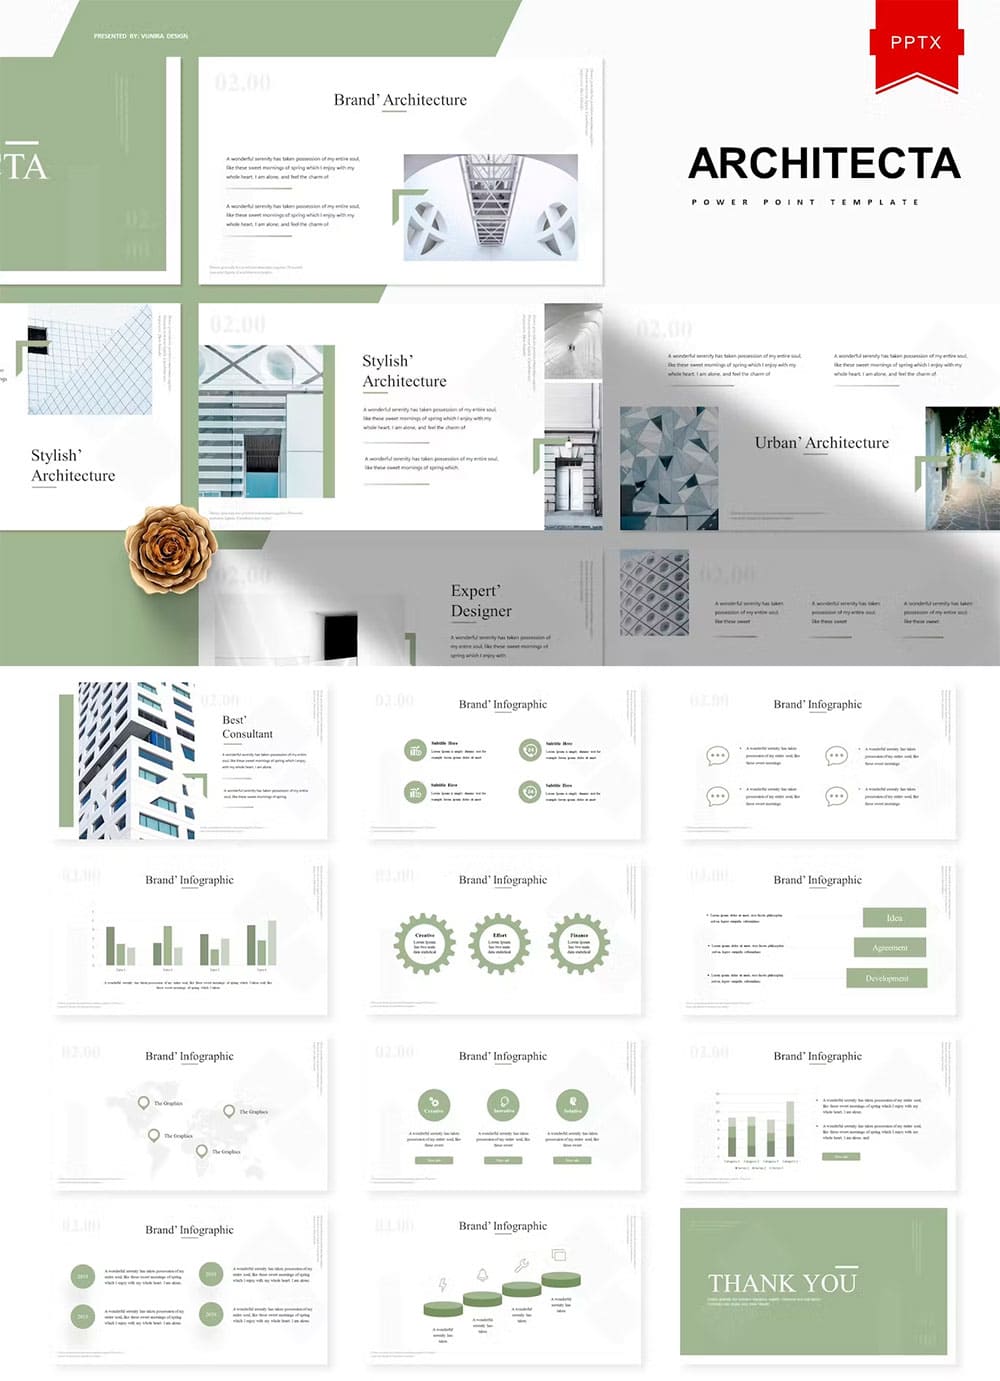 Architecta powerpoint template, picture for pinterest.